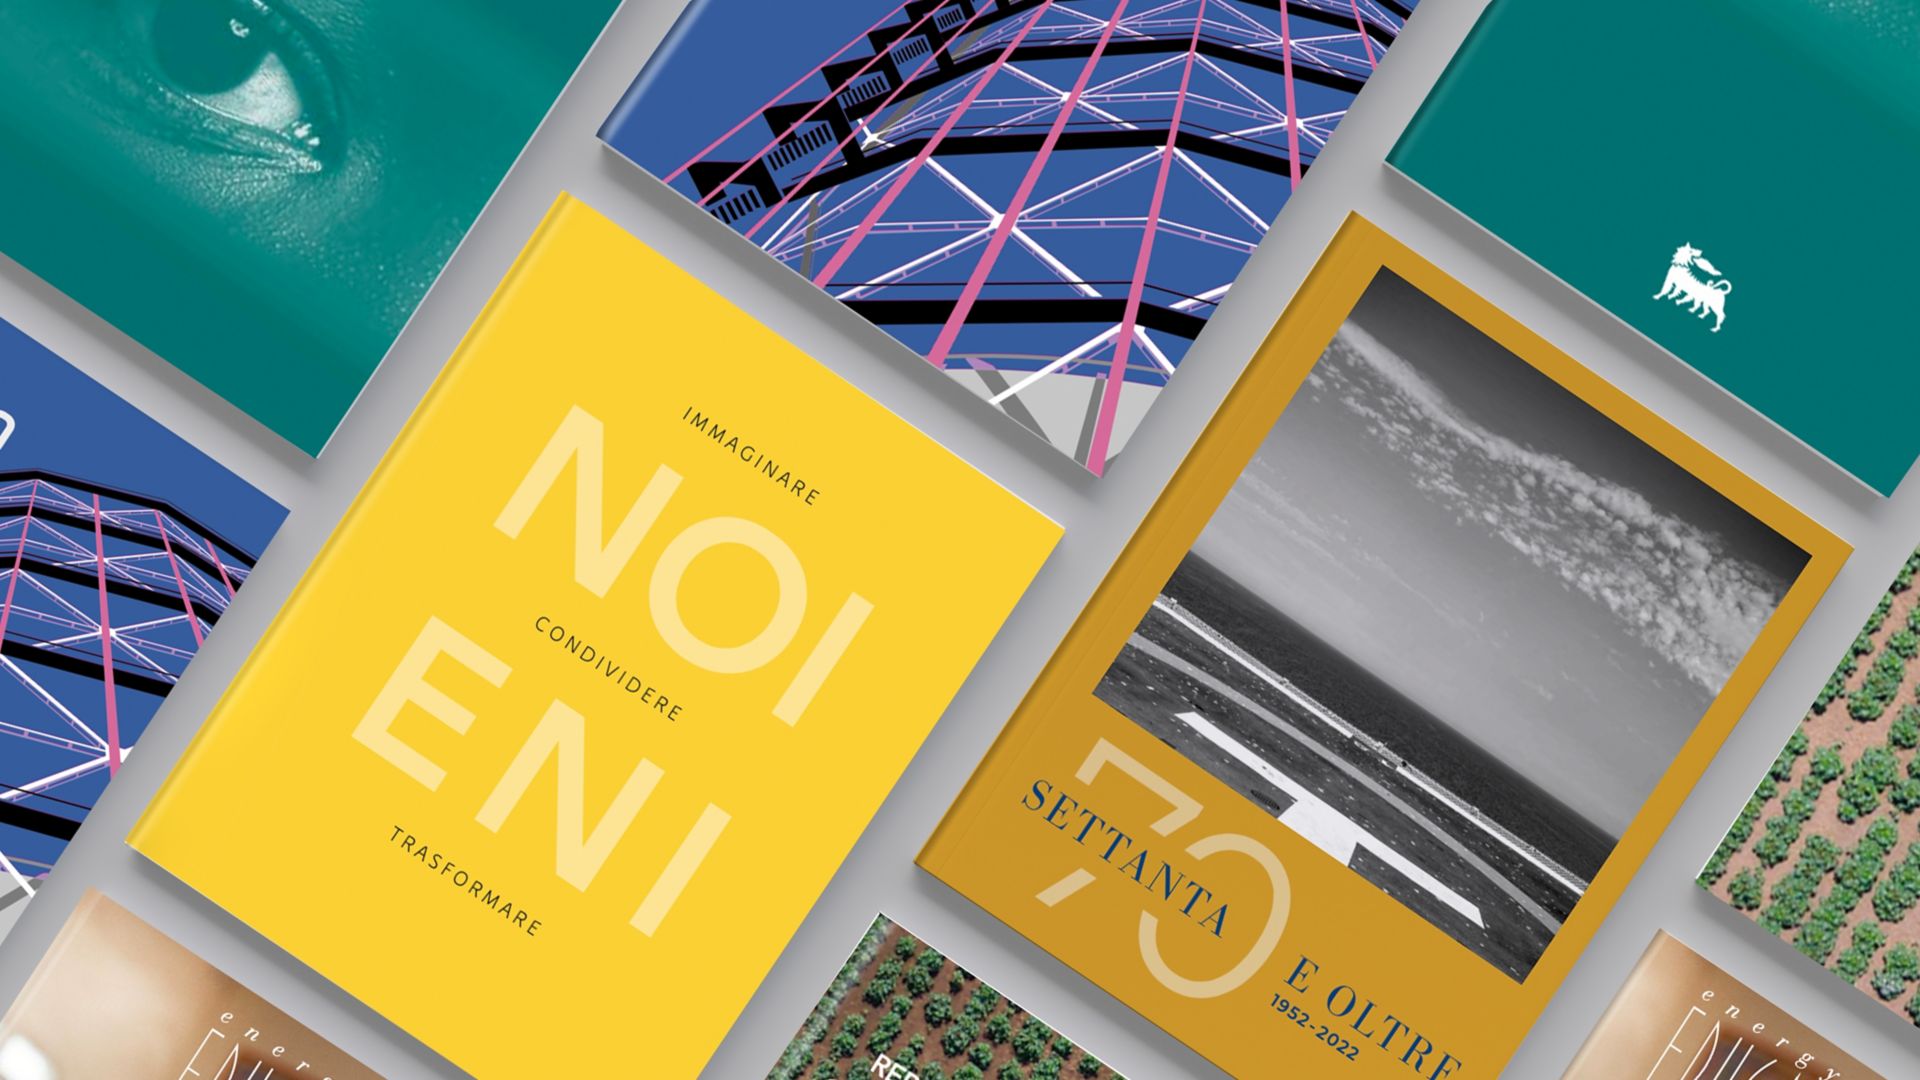 Some covers of books published by Eni